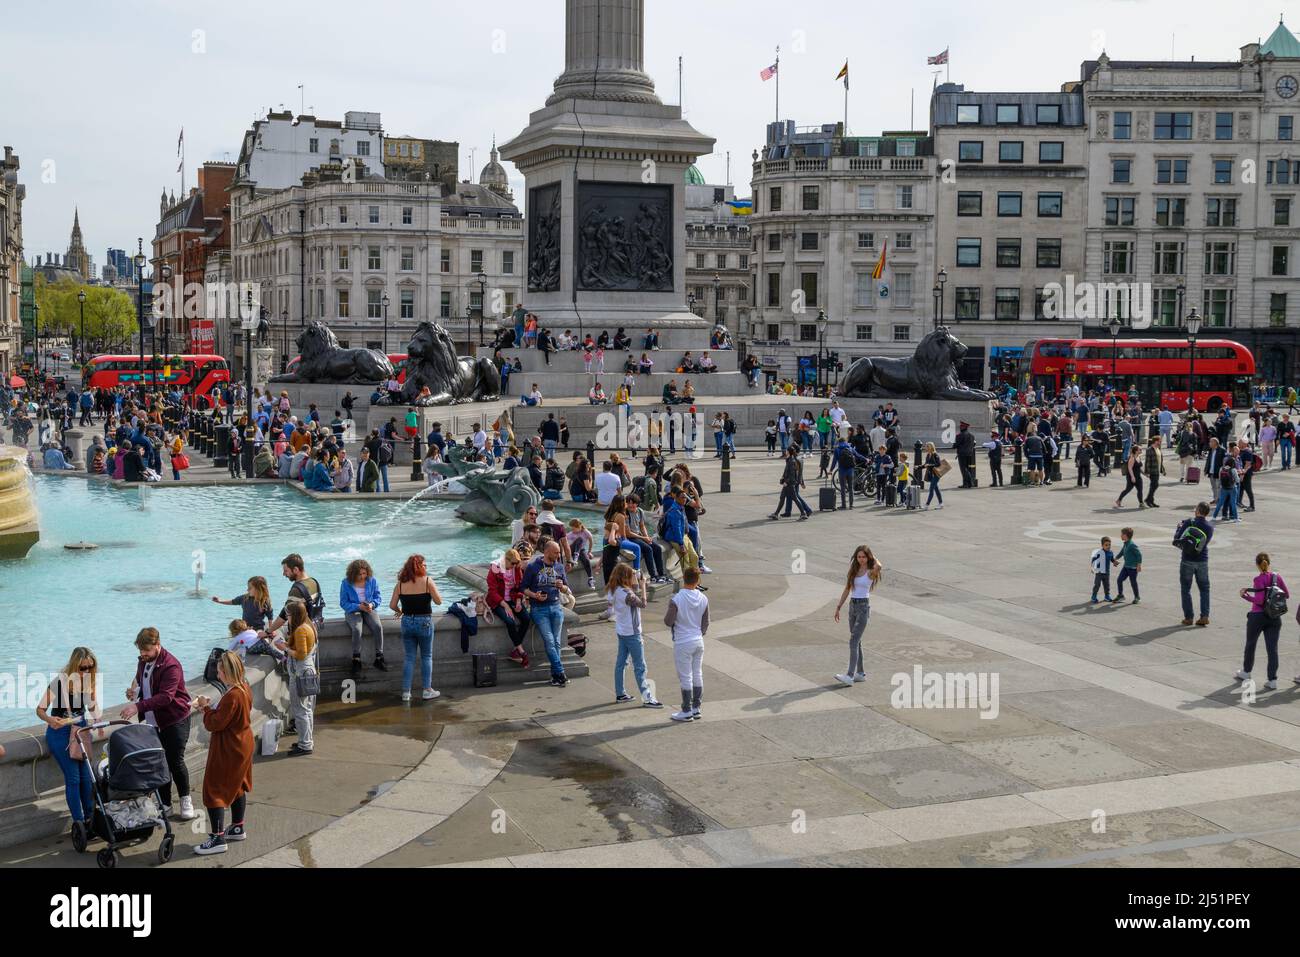 Crowds of people in warm sunny weather at Easter in Trafalgar Square, London, UK, April, 2022 Stock Photo